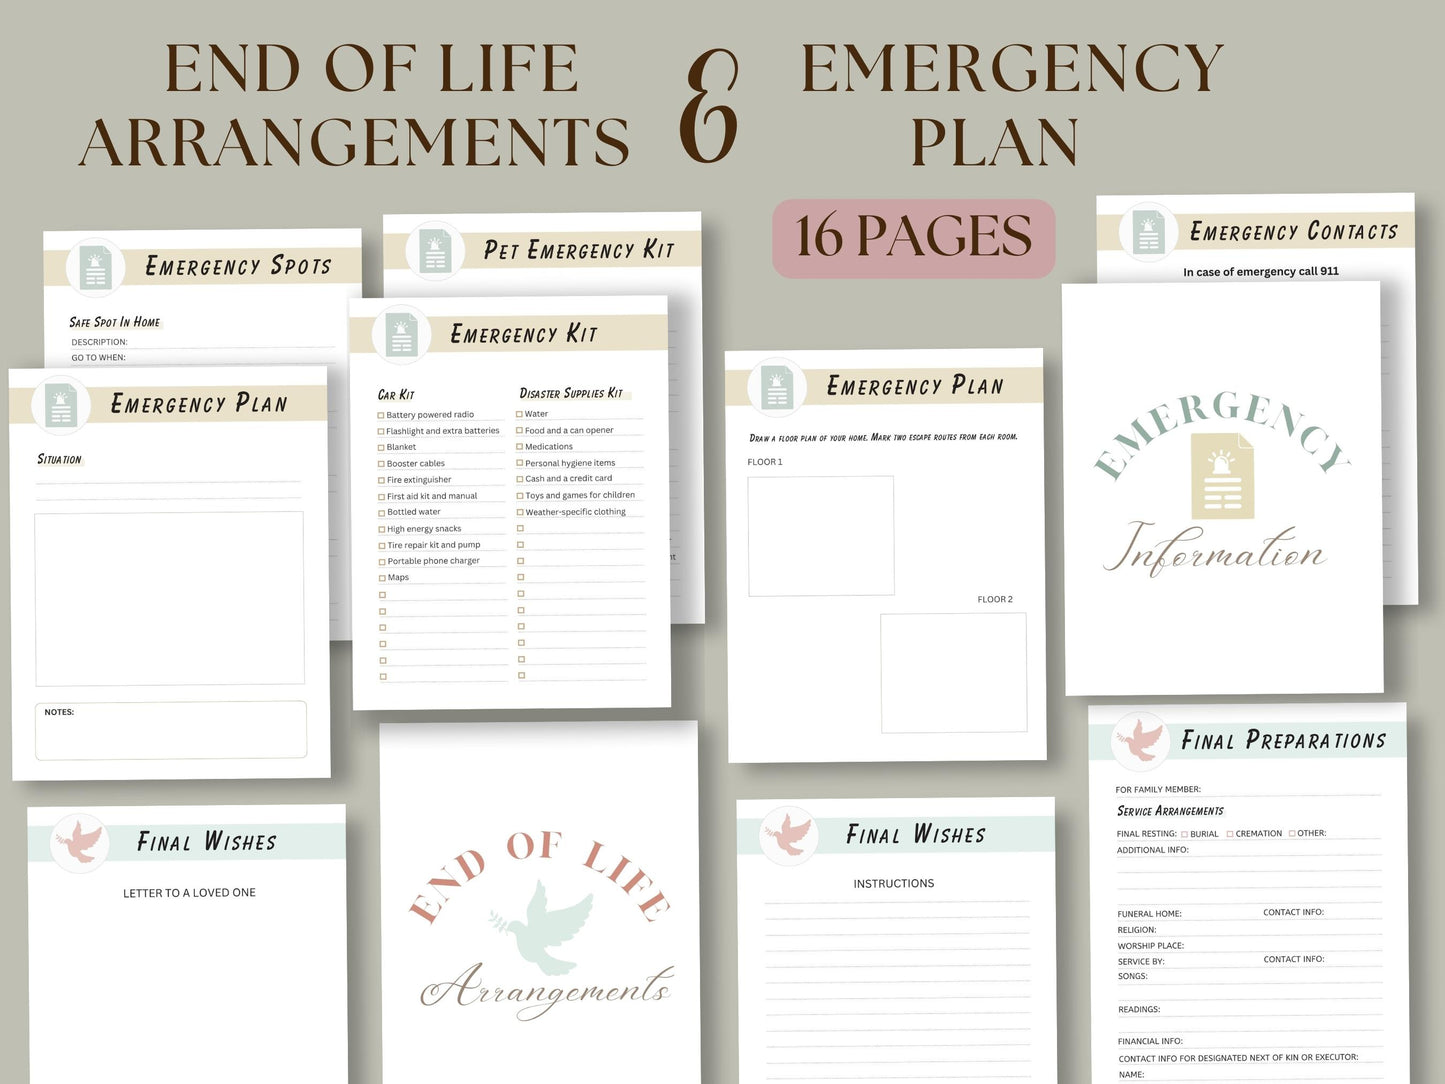 End of life arrangements, emergency plan, emergency check list. Example pages of End of life binder